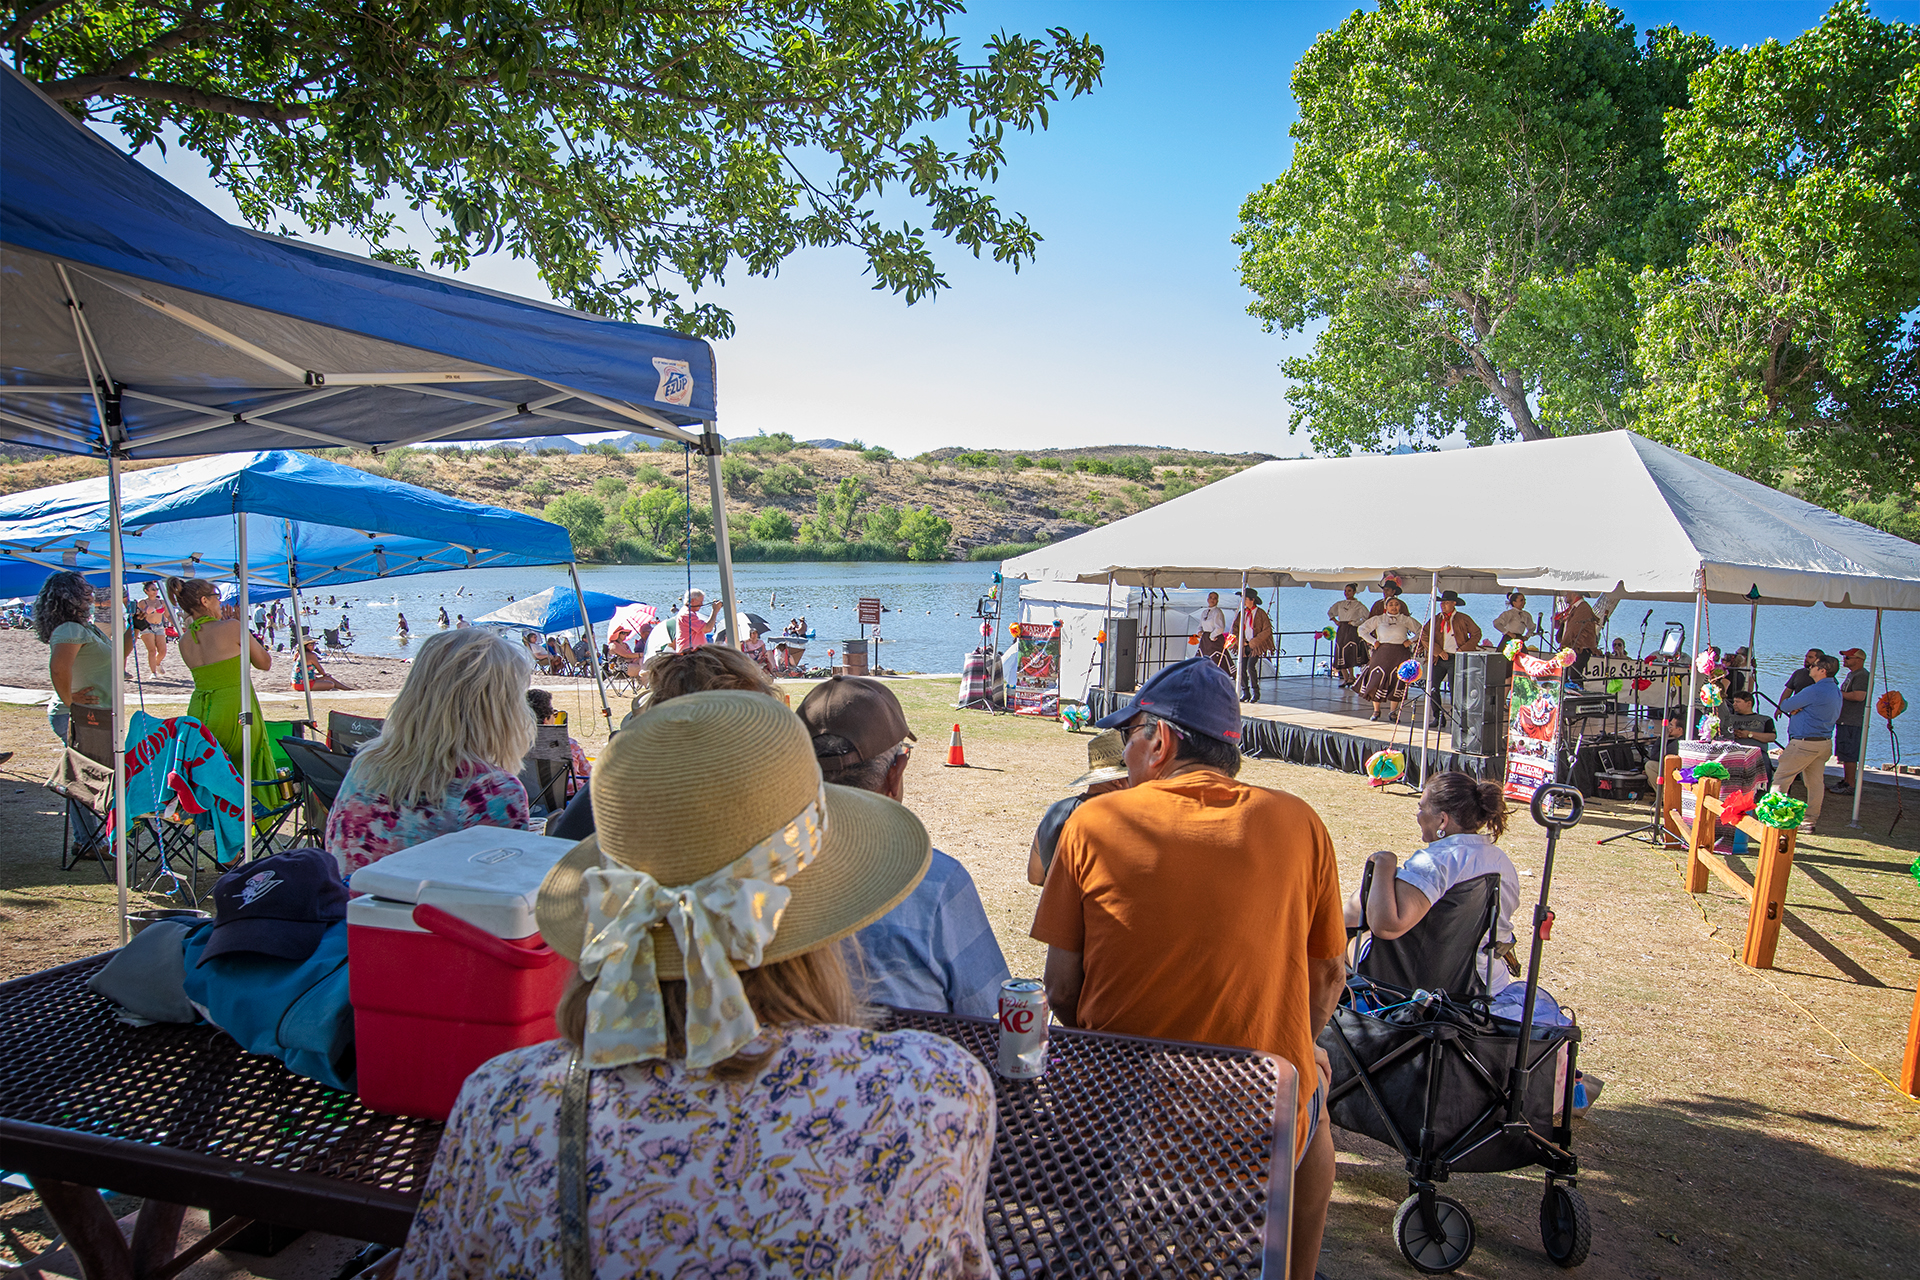 A crowd sits under the shade of trees and popup tents, facing a stage that is set up in front of the lake.